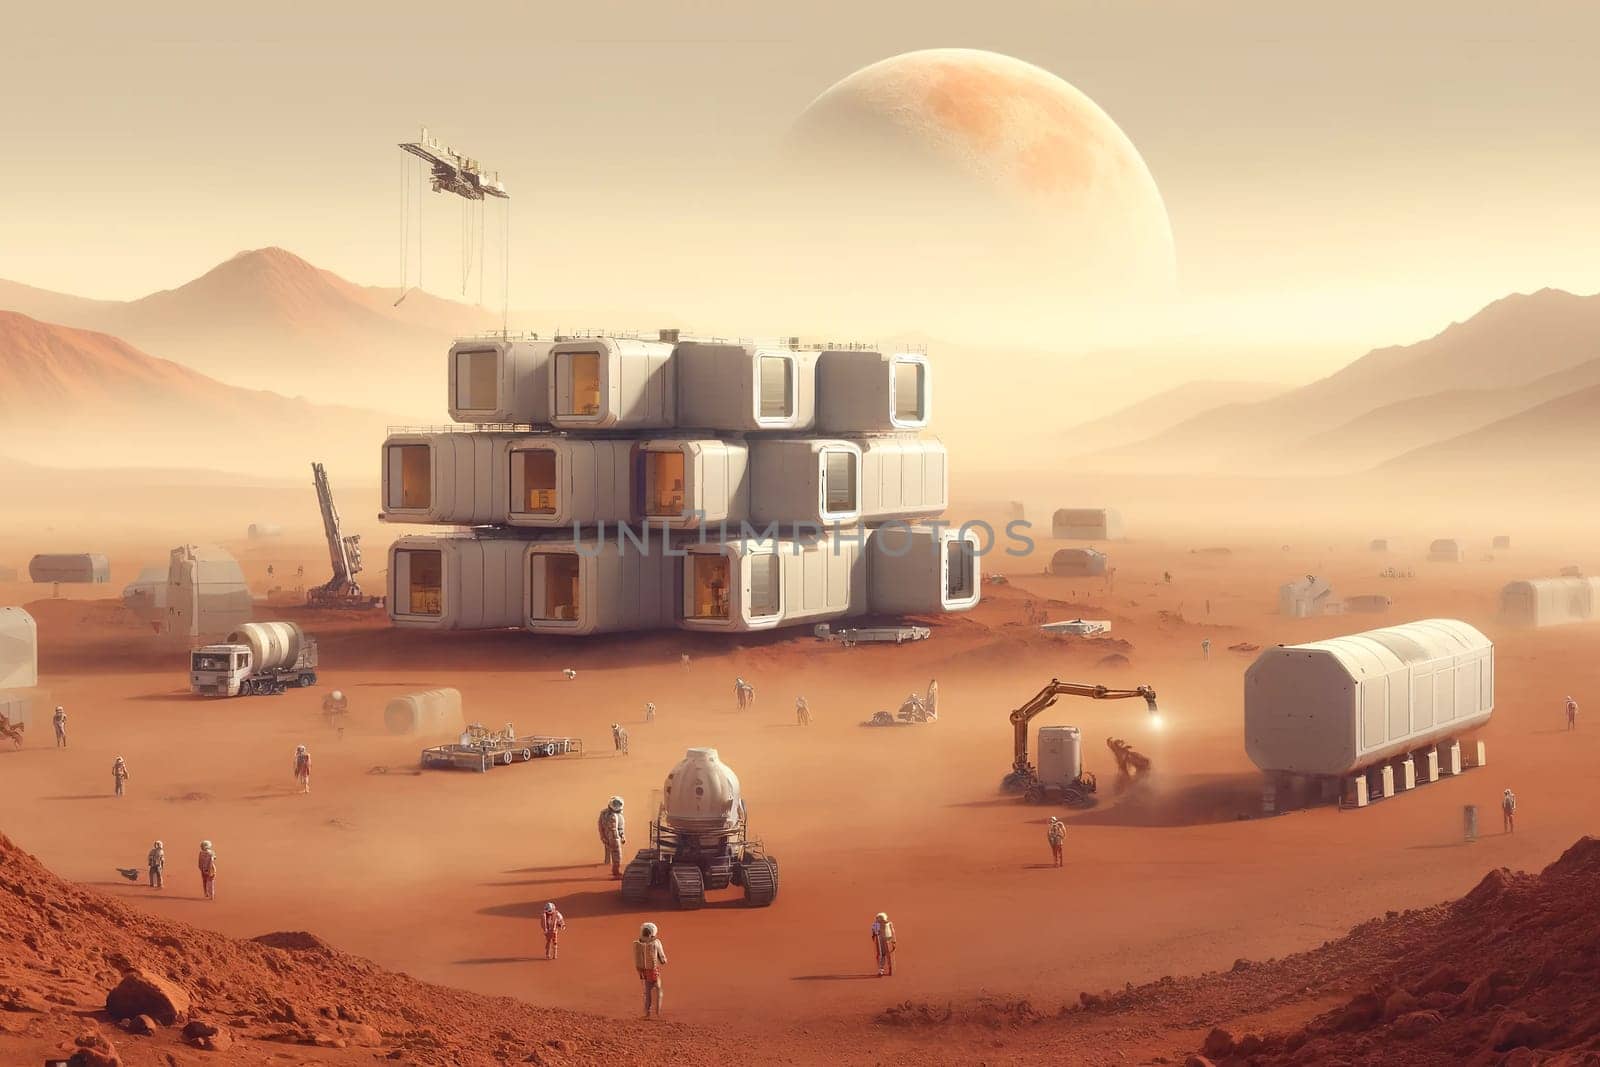 Colonization of Mars, construction of residential modules by Annado